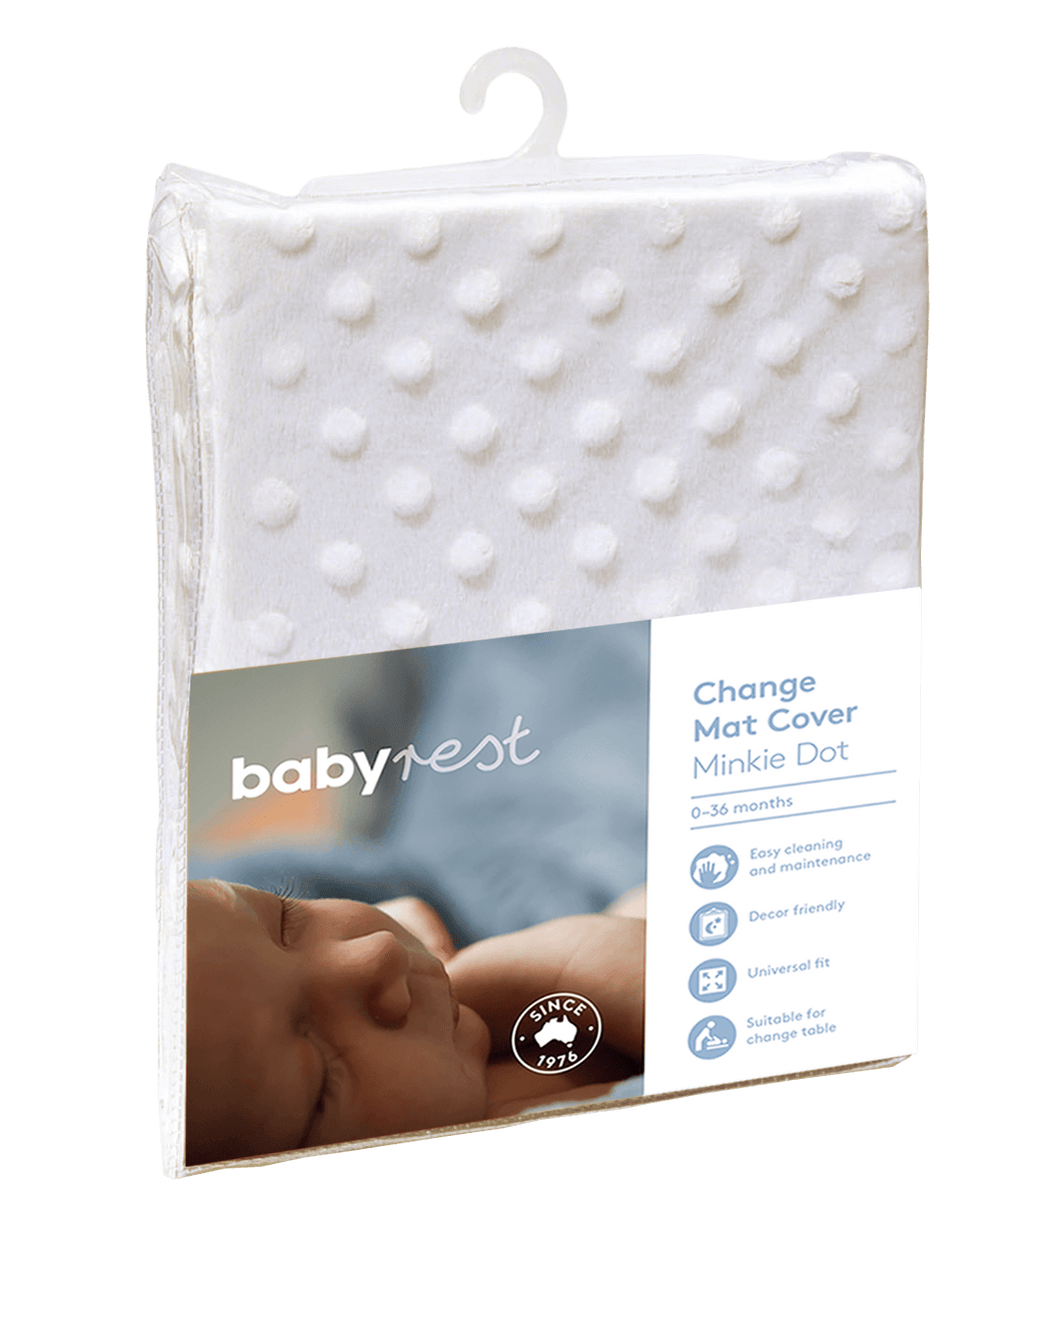 Baby Rest Universal Change Mat Covers 2pk